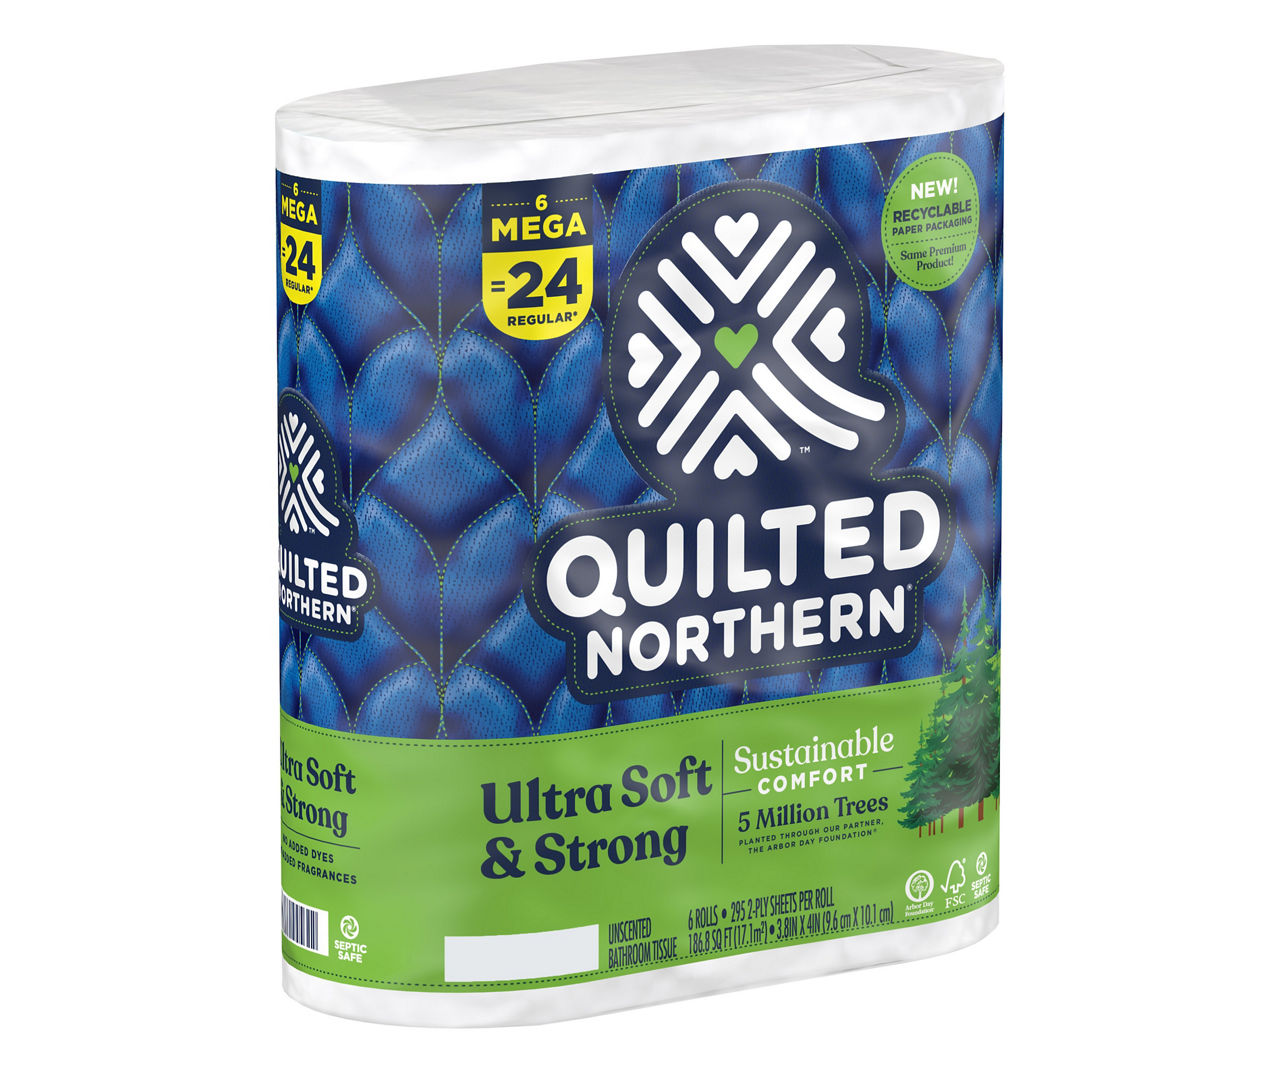 Quilted Northern Ultra Soft and Strong Toilet Paper - HapyDeals